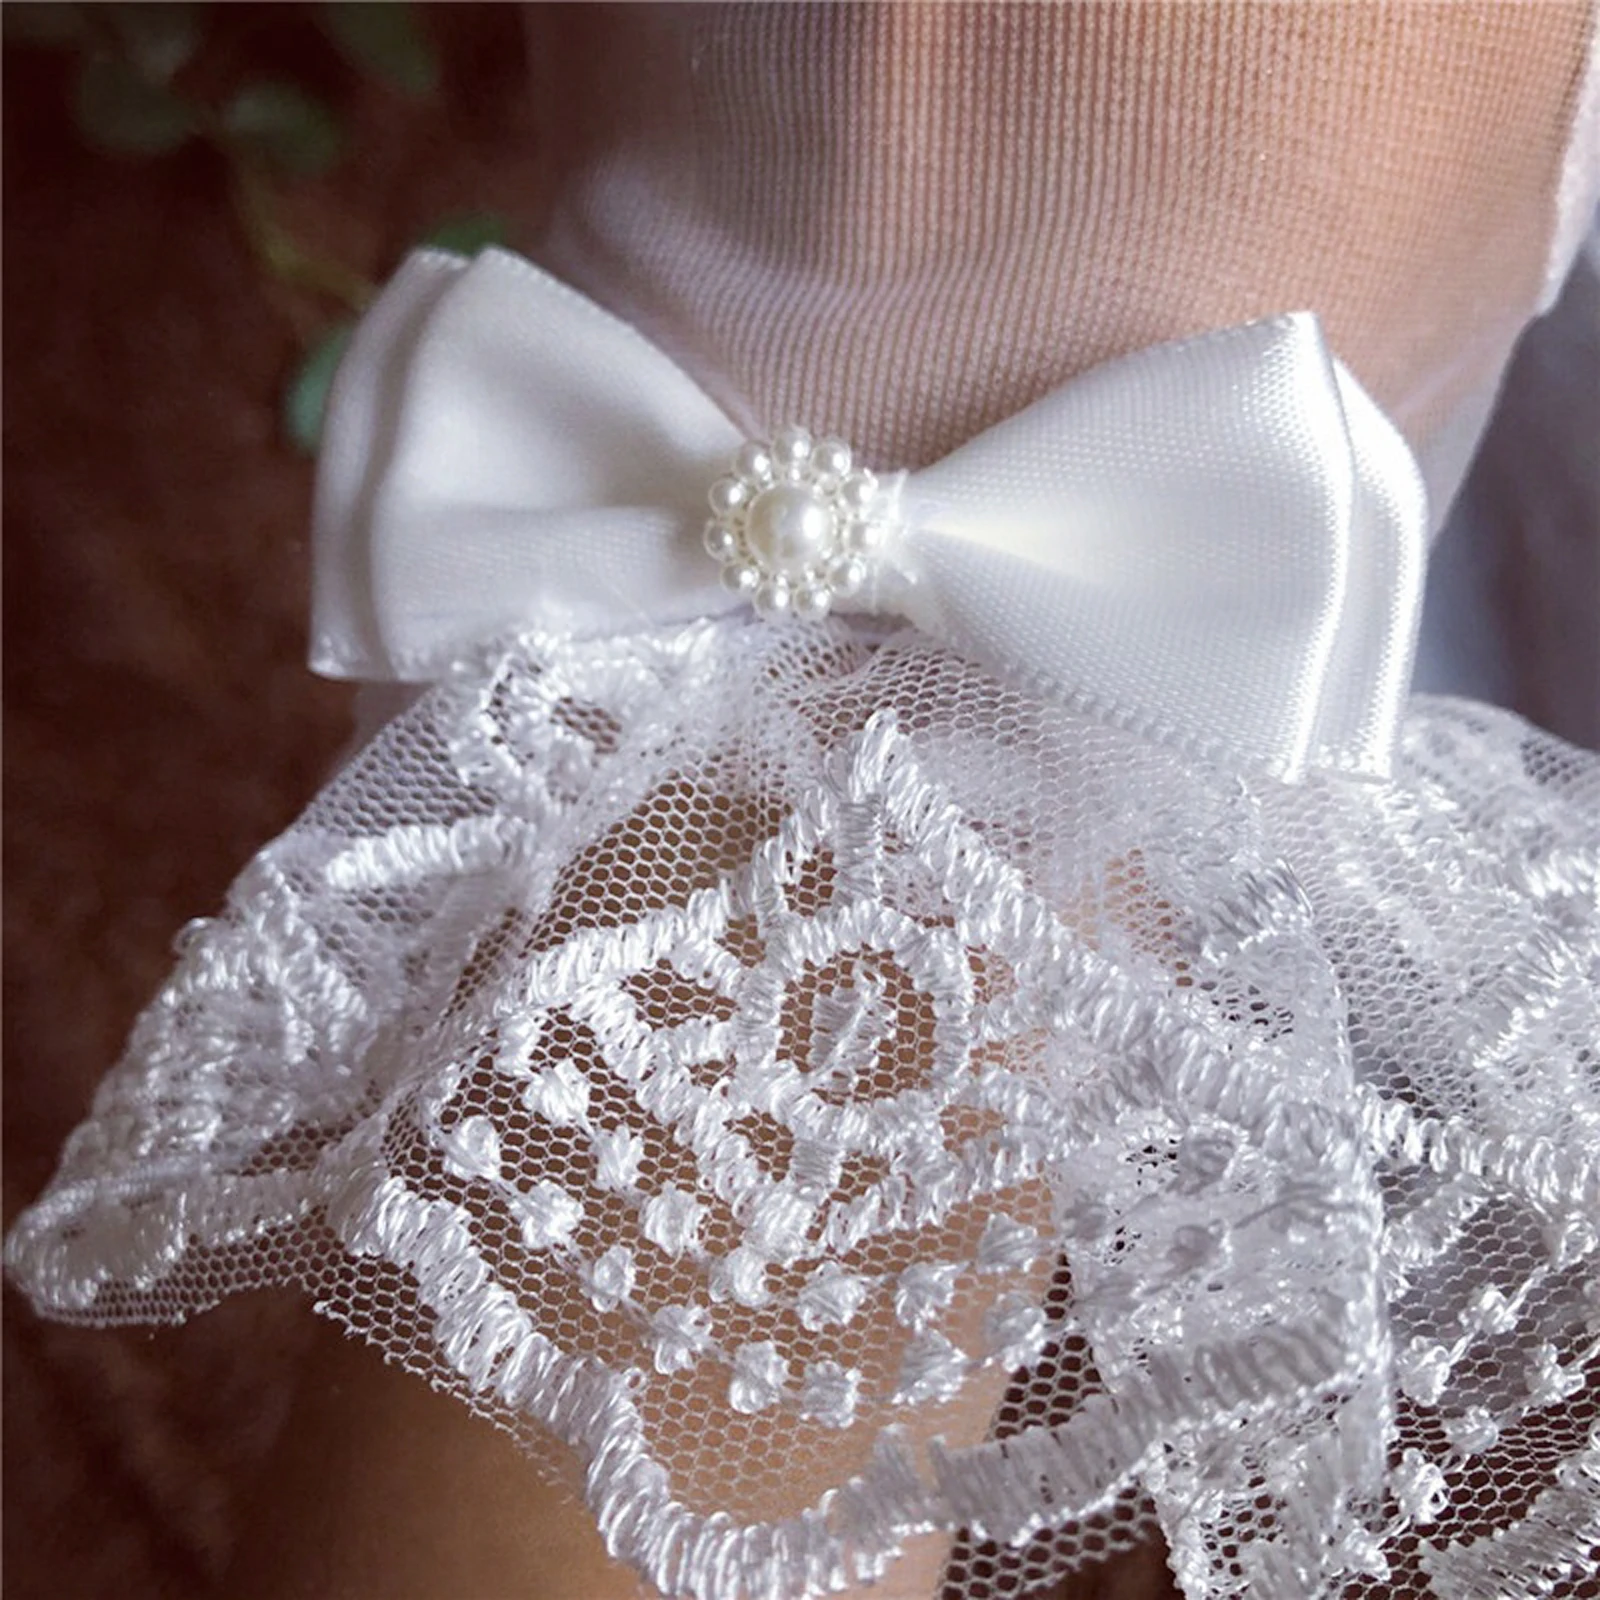 

TOPQUEEN M07 Bride Wedding Accessories Women's Thin Gloves with Pearls Bow-knot Wrist Flowers Lace Gloves Women White Gloves